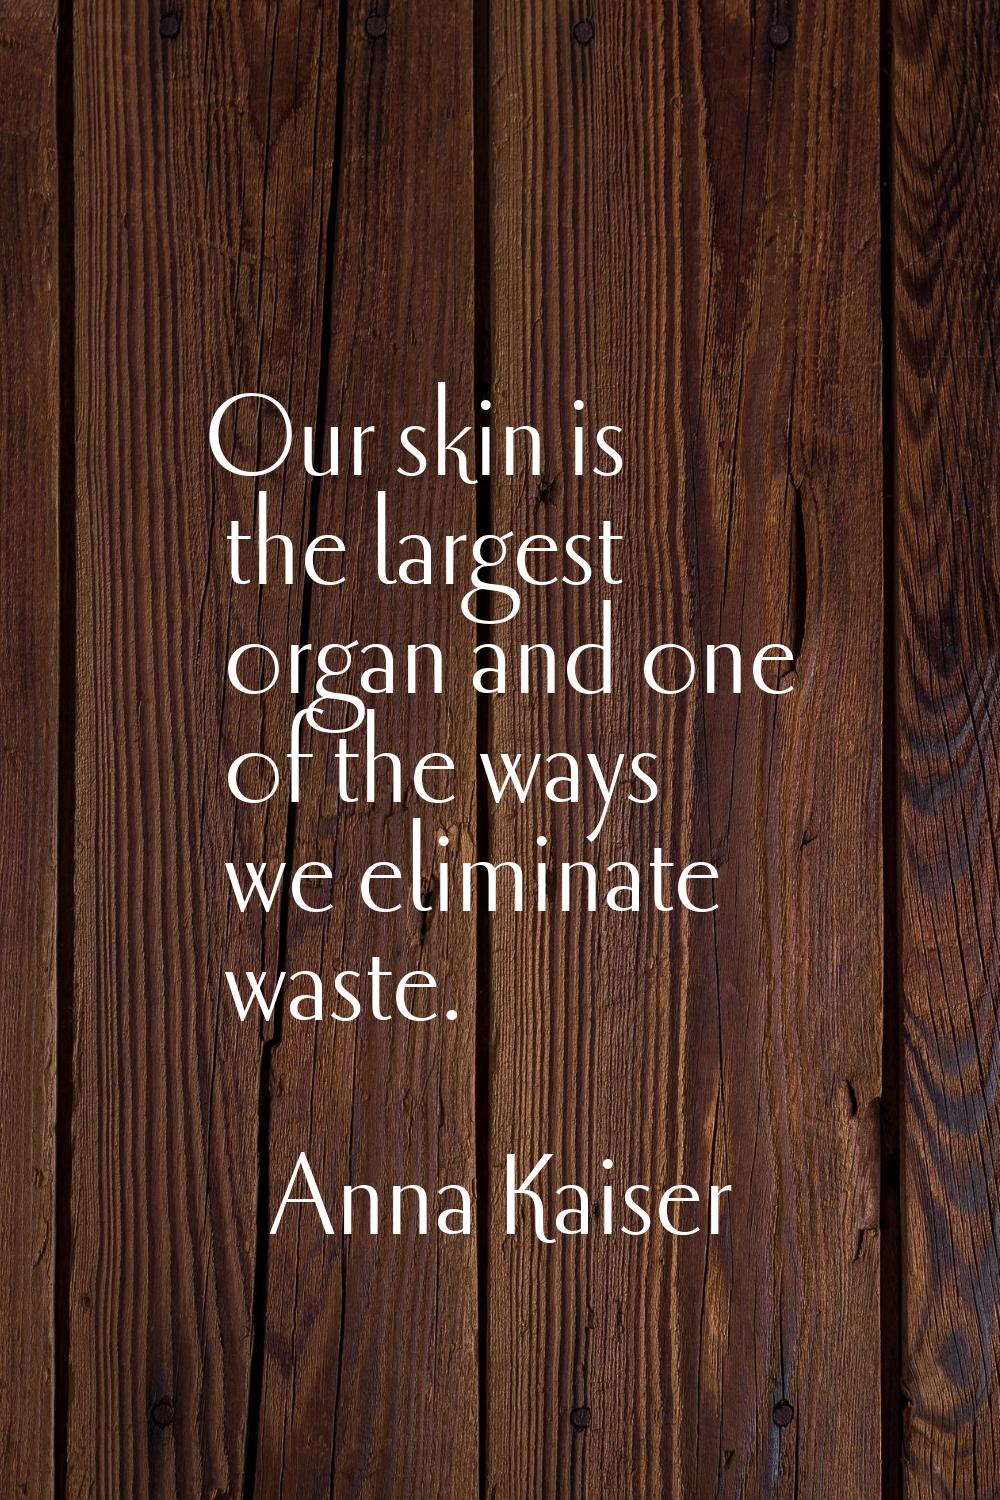 Our skin is the largest organ and one of the ways we eliminate waste.